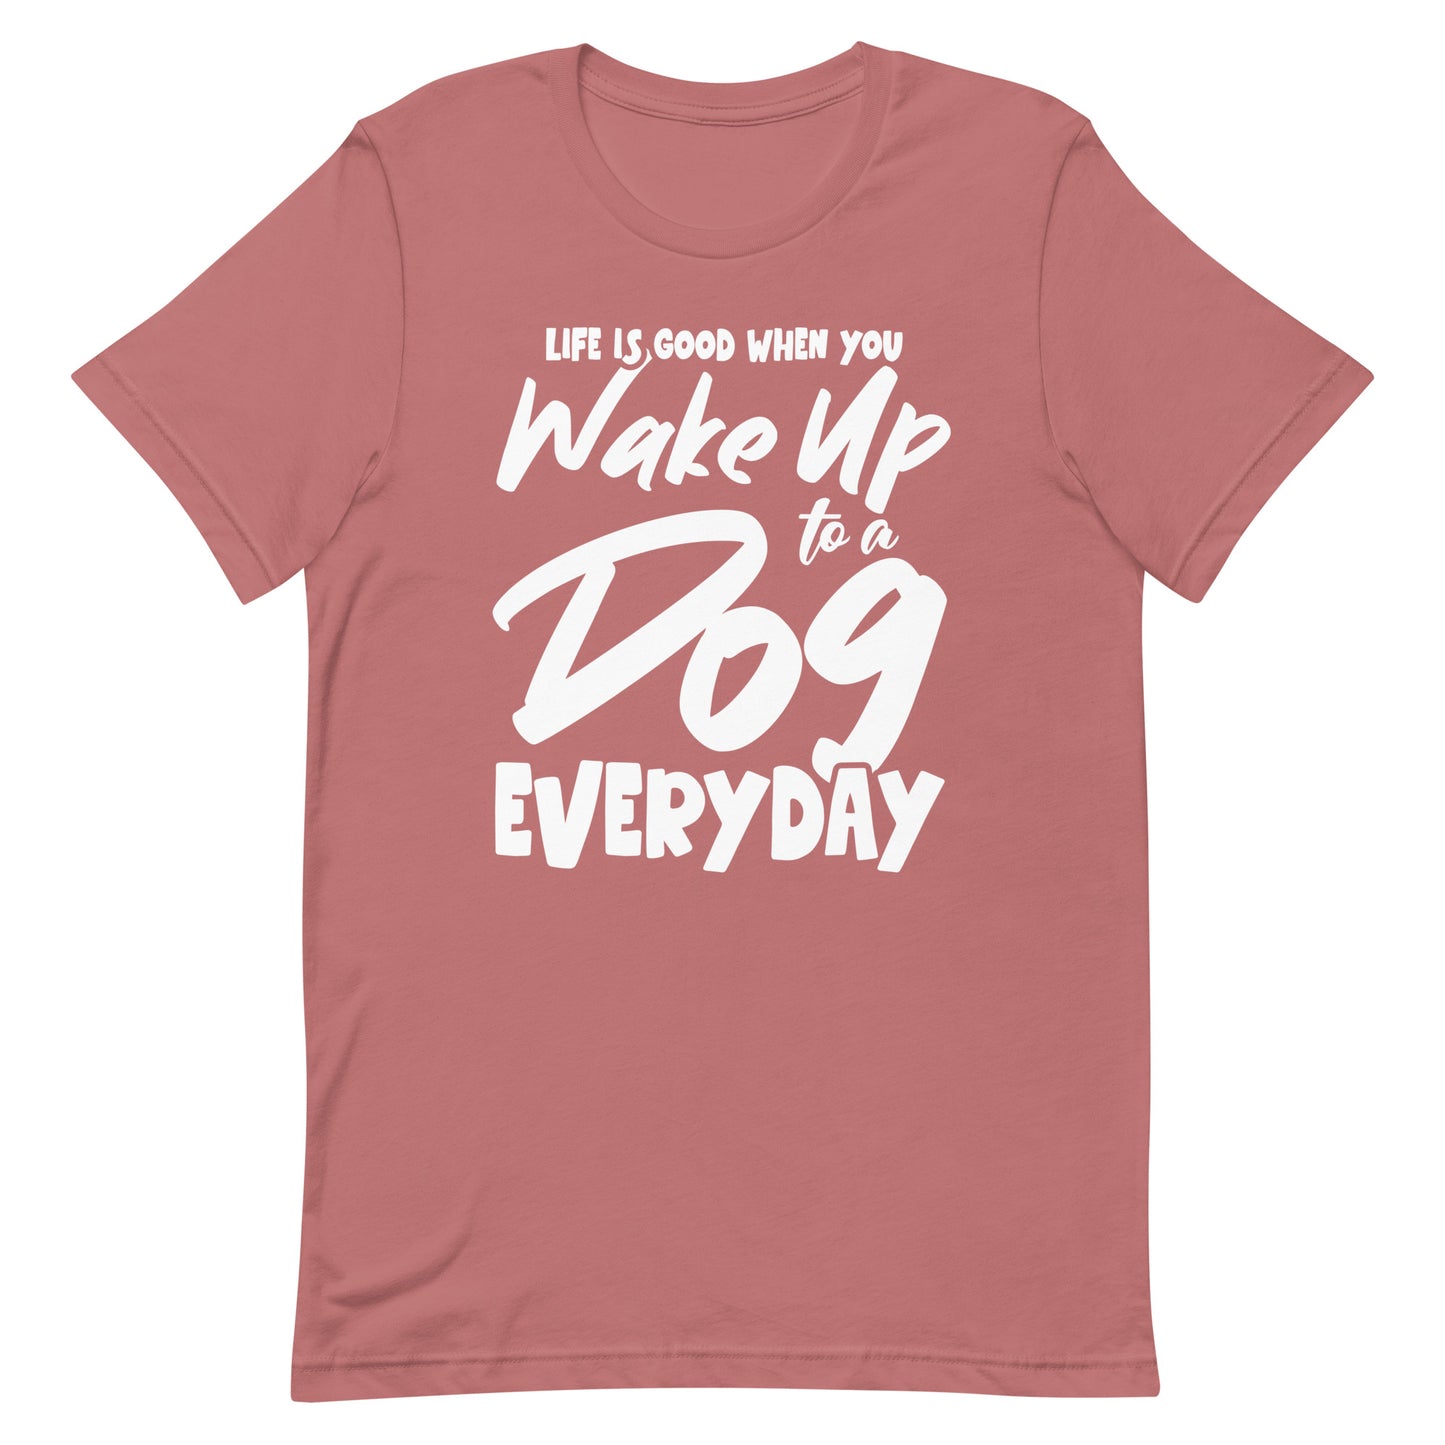 Life is Good When You Wake Up to a Dog Everyday T-Shirt